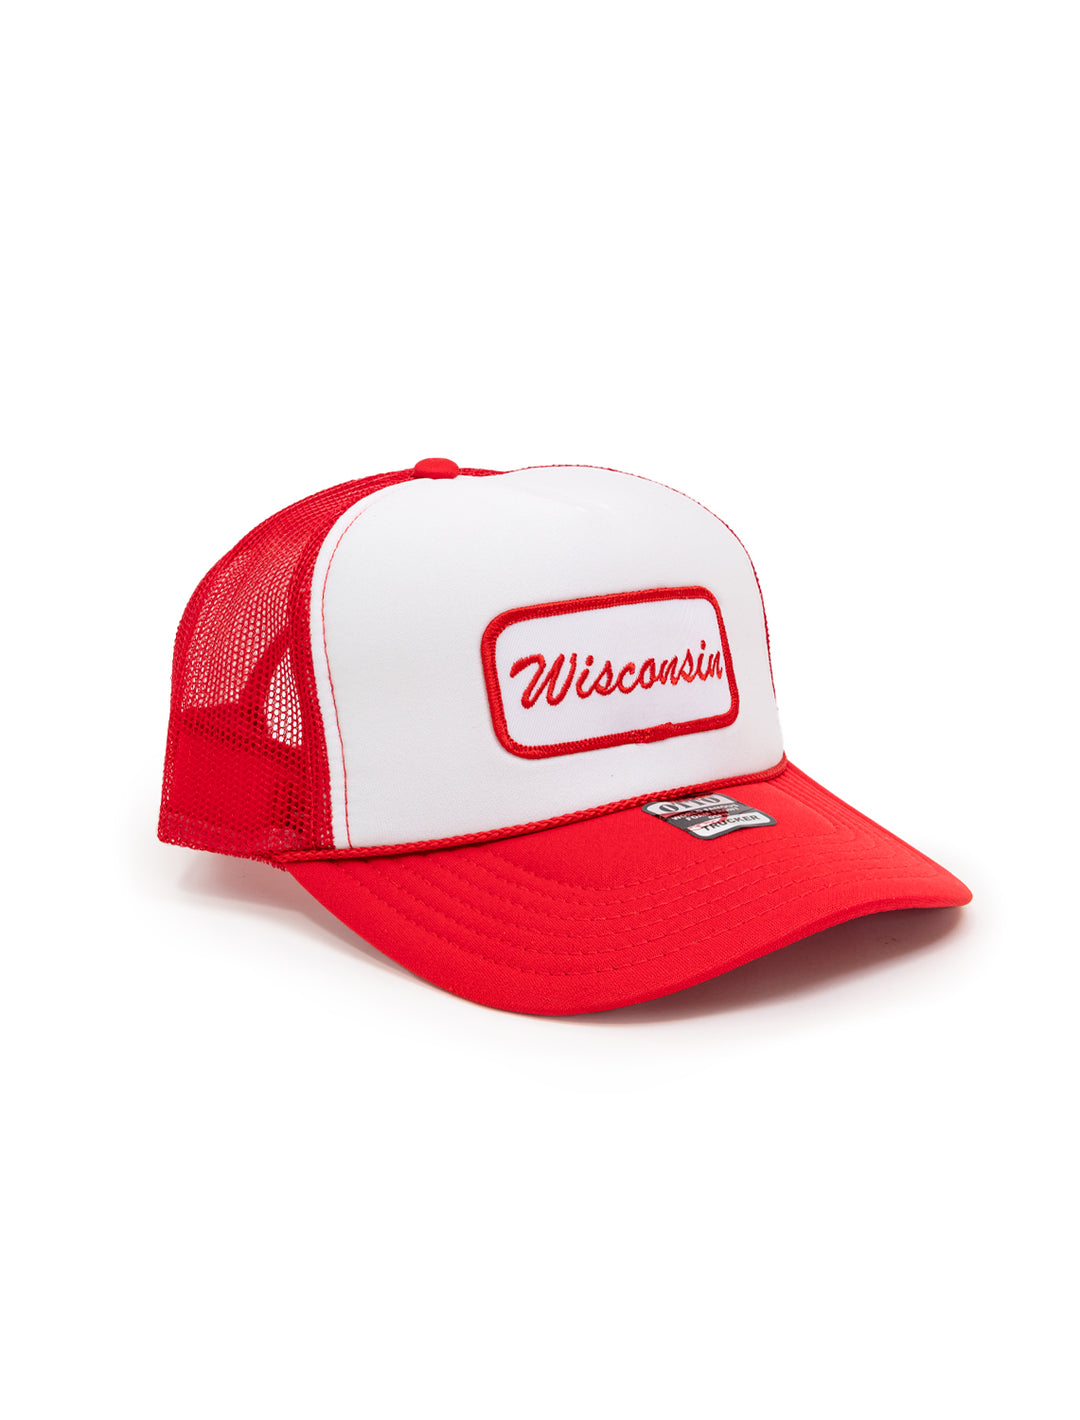 Recess Apparel's Name Plate Trucker Hat in Red and White.